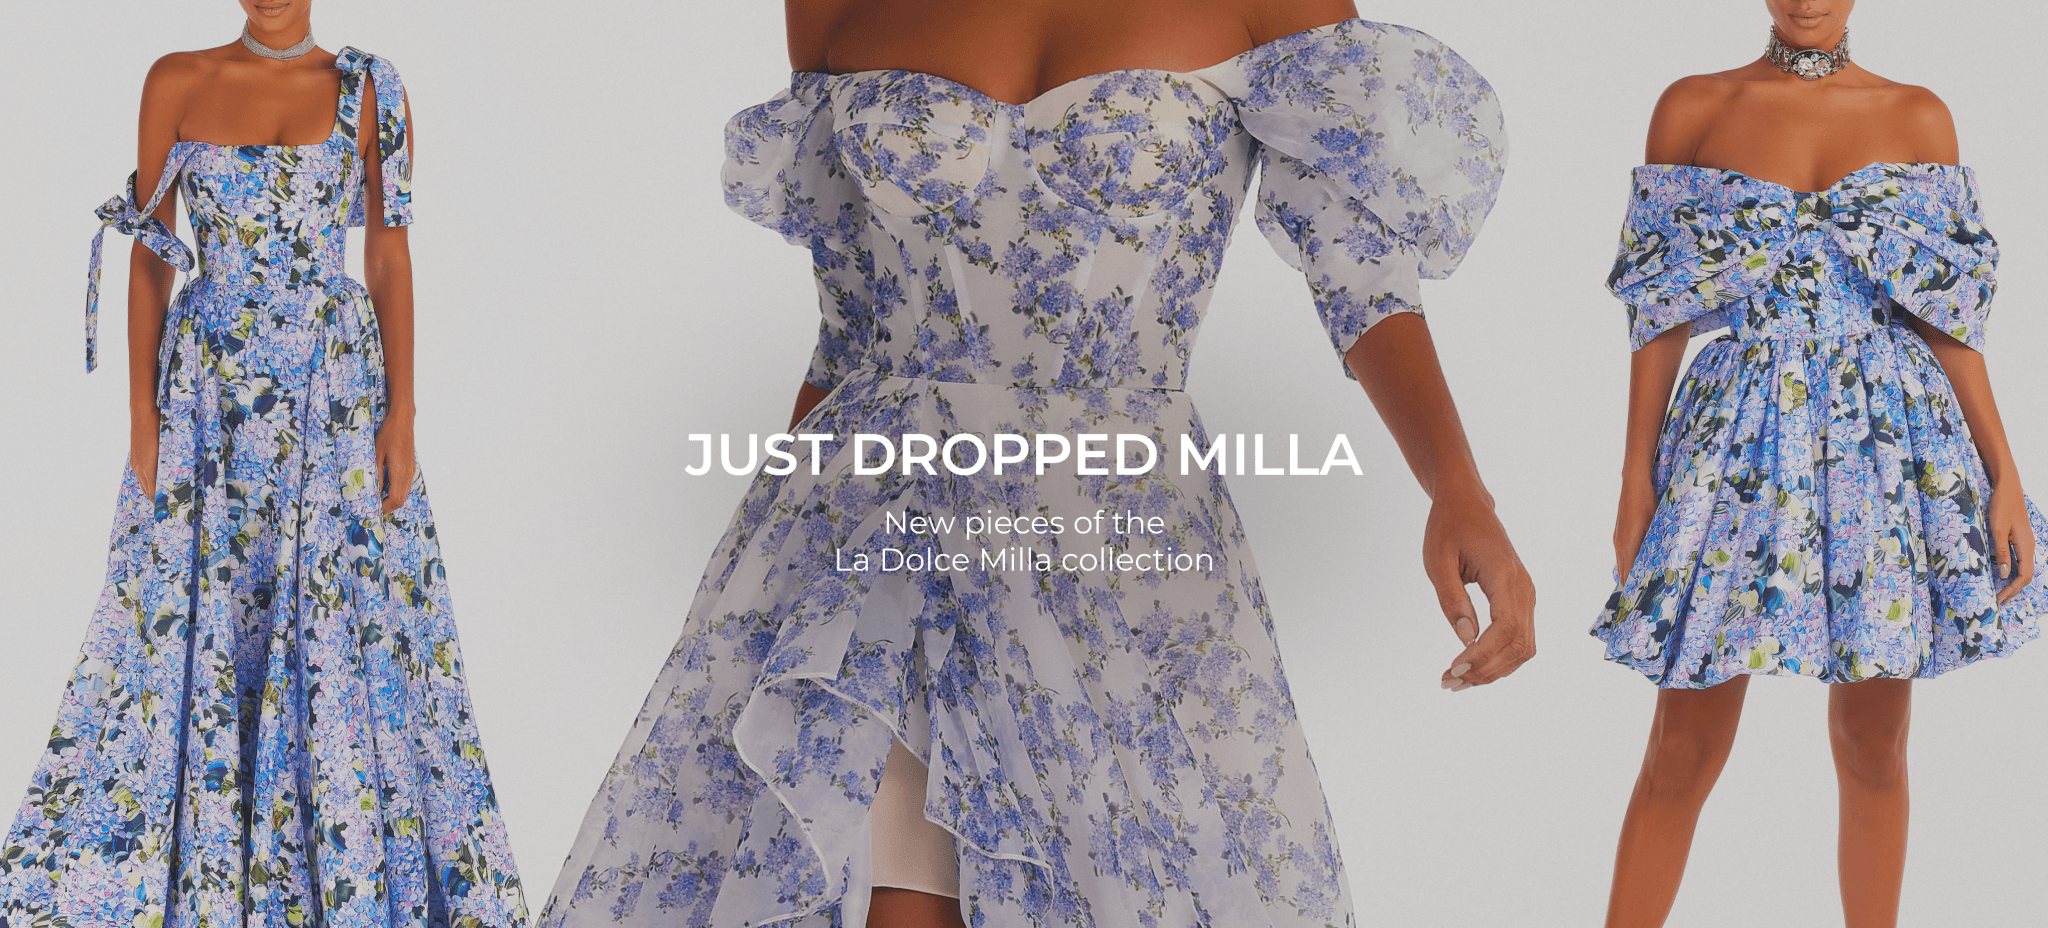 Just dropped: new styles of the La Dolce Milla collection - Milla